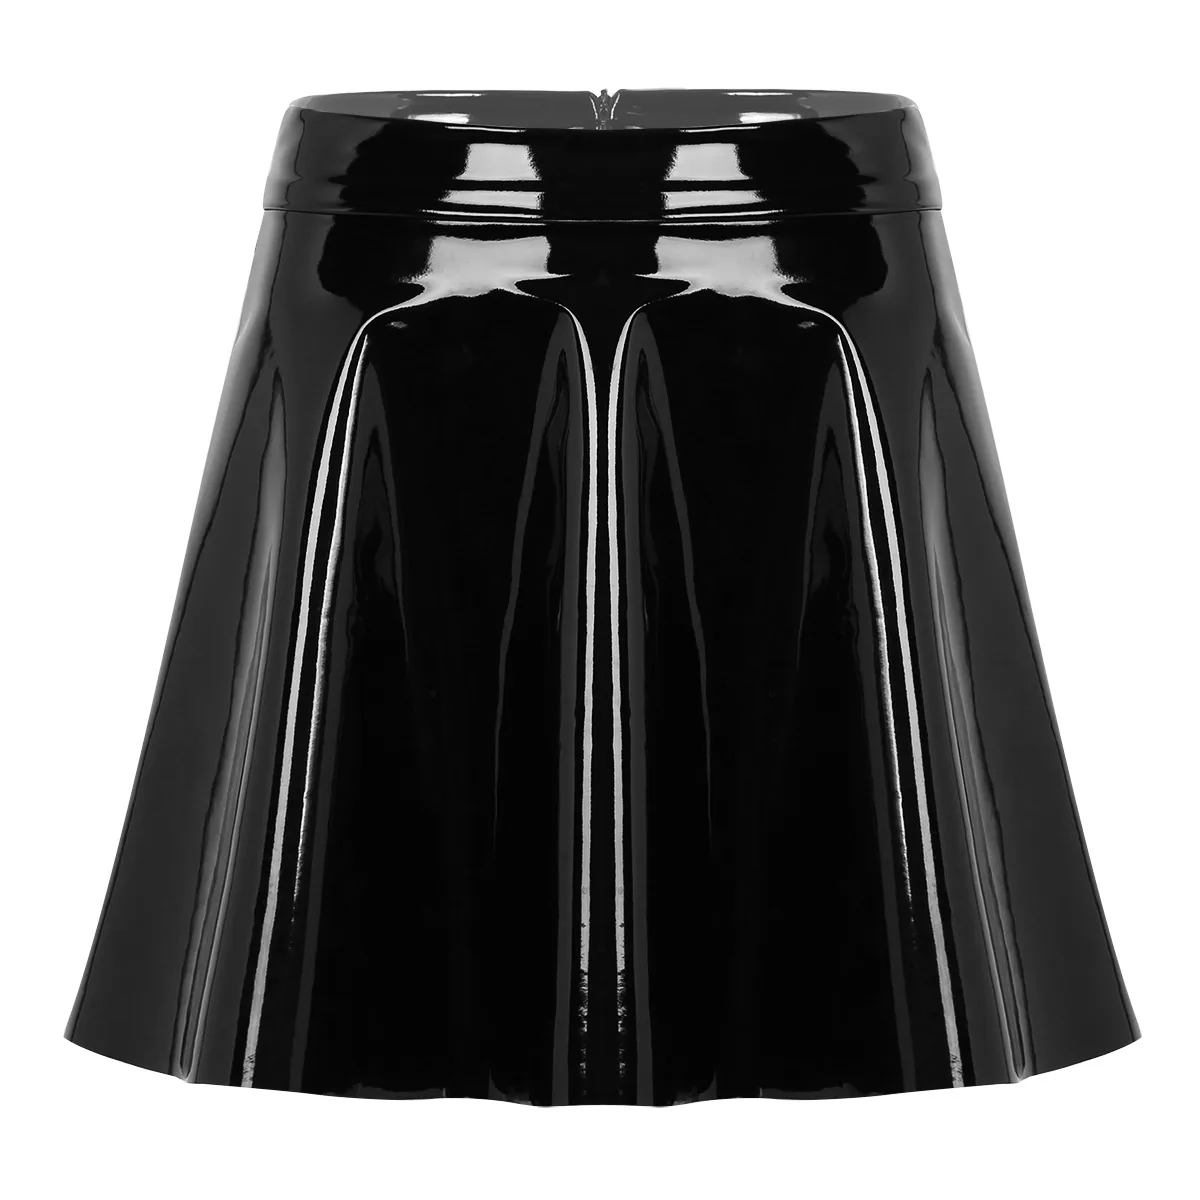 

MSemis Womens Skirt Clothes Wet Look Leather High Waist Flared Pleated A-Line Circle Mini Skater Skirt Sexy Pole Dance Costumes